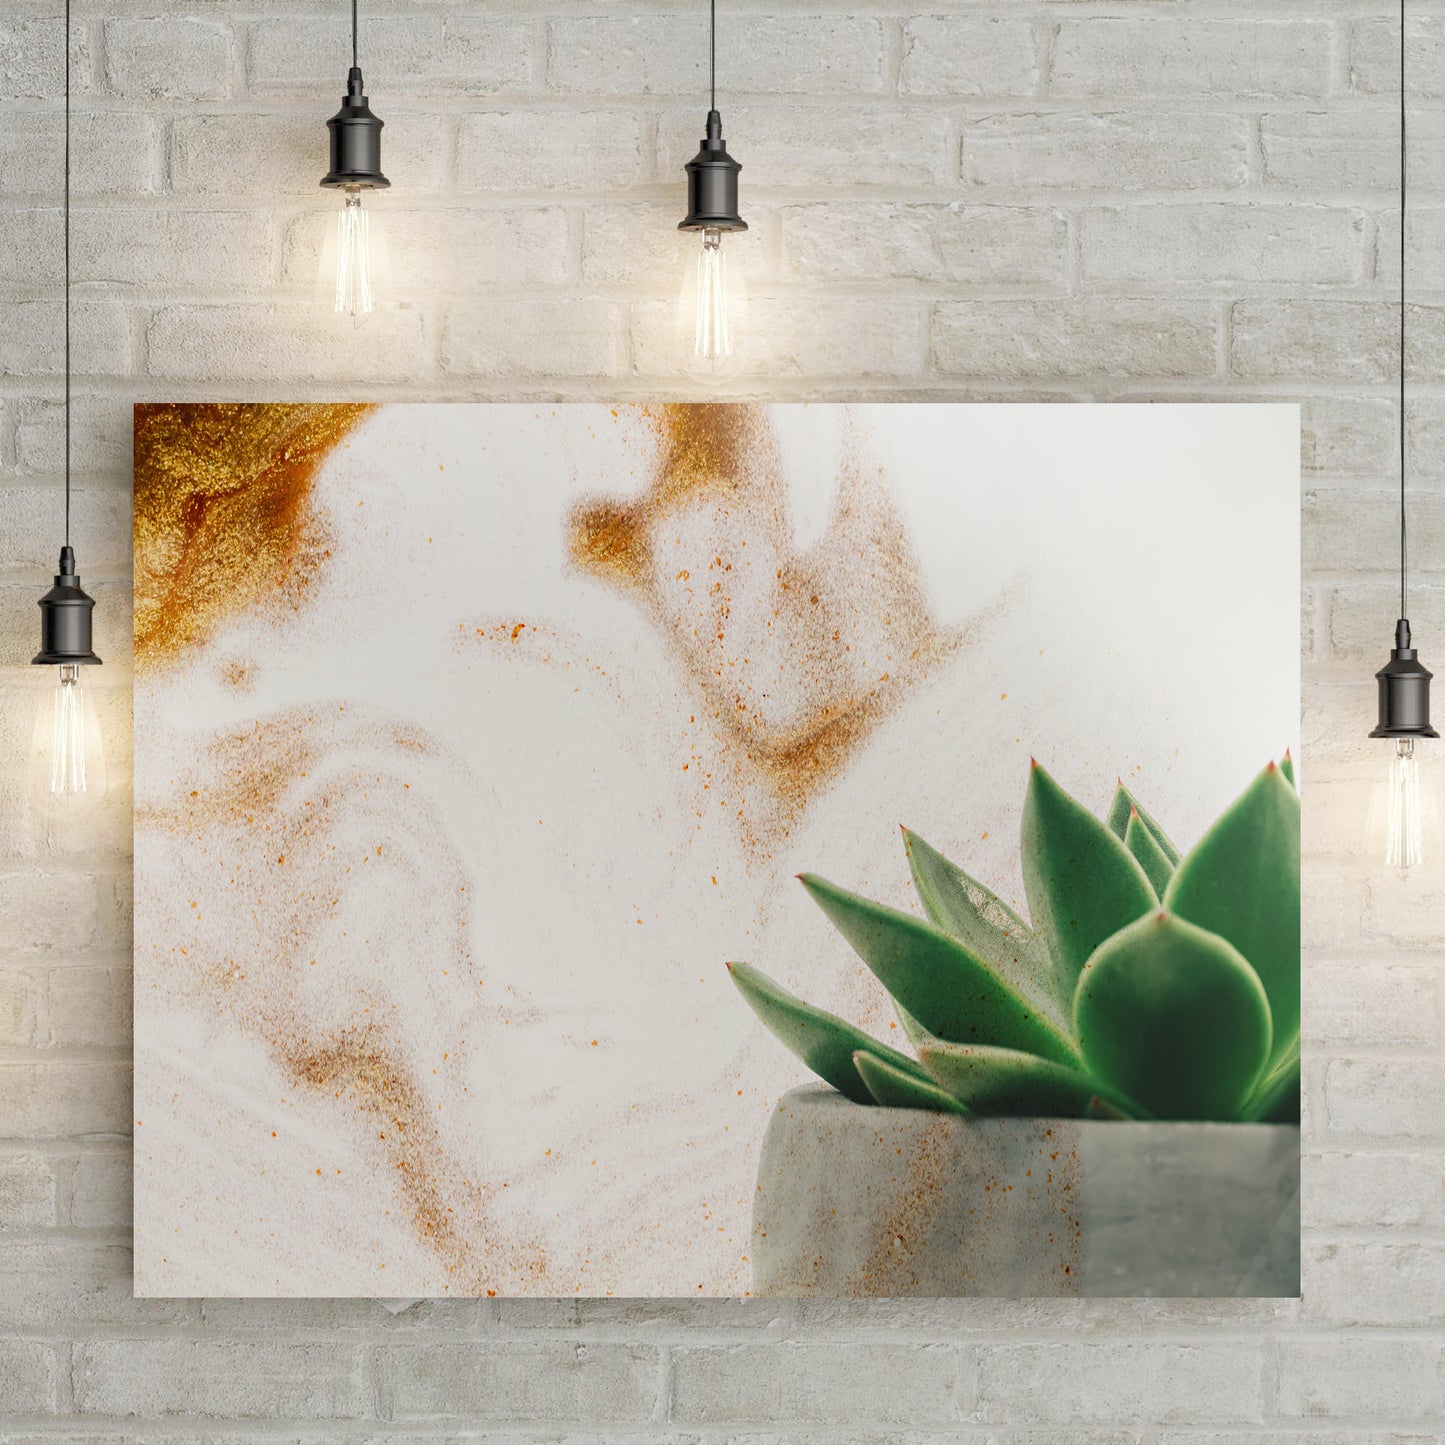 Stone Pot Succulent Plant Canvas Wall Art - Image by Tailored Canvases